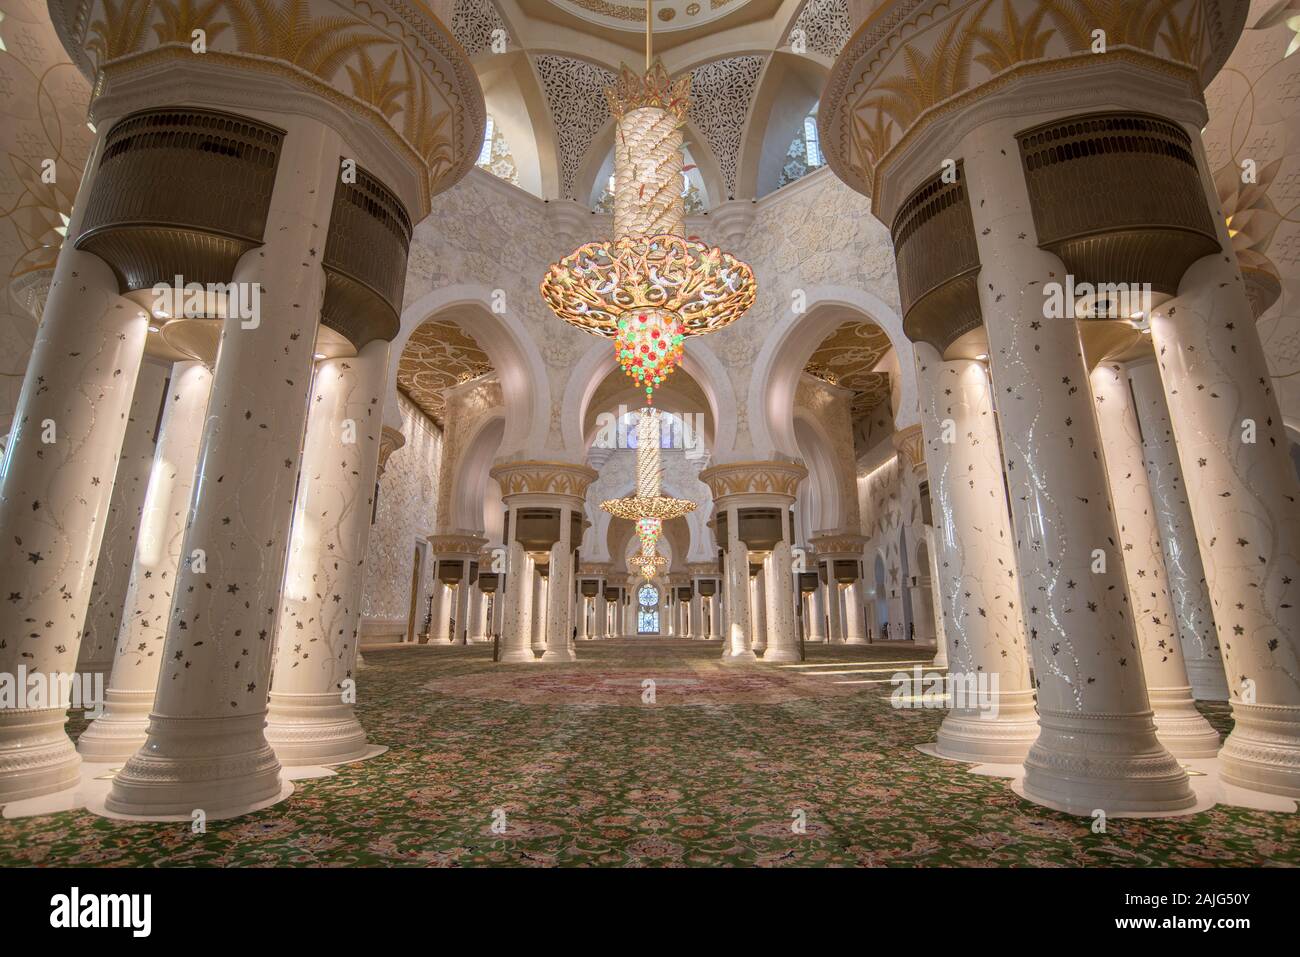 Abu Dhabi, United Arab Emirates: Interior (prayer hall) of Sheikh Zayed Mosque, Grand Mosque with columns, arches and glass chandeliers Stock Photo